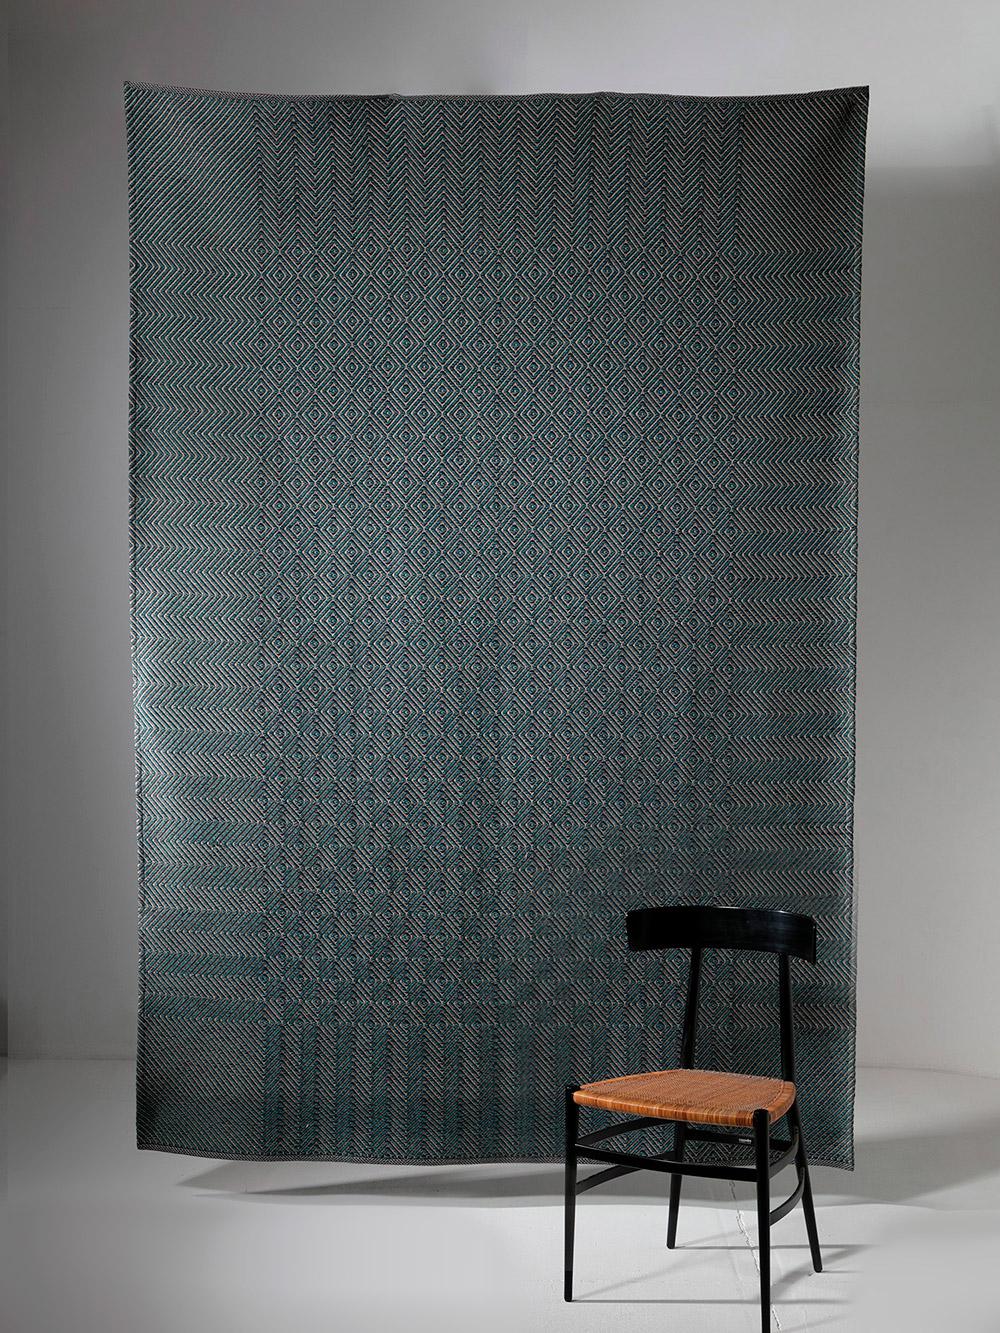 Large Geometric Wool Carpet or Tapestry by Renata Bonfanti, Italy, 1970s For Sale 4